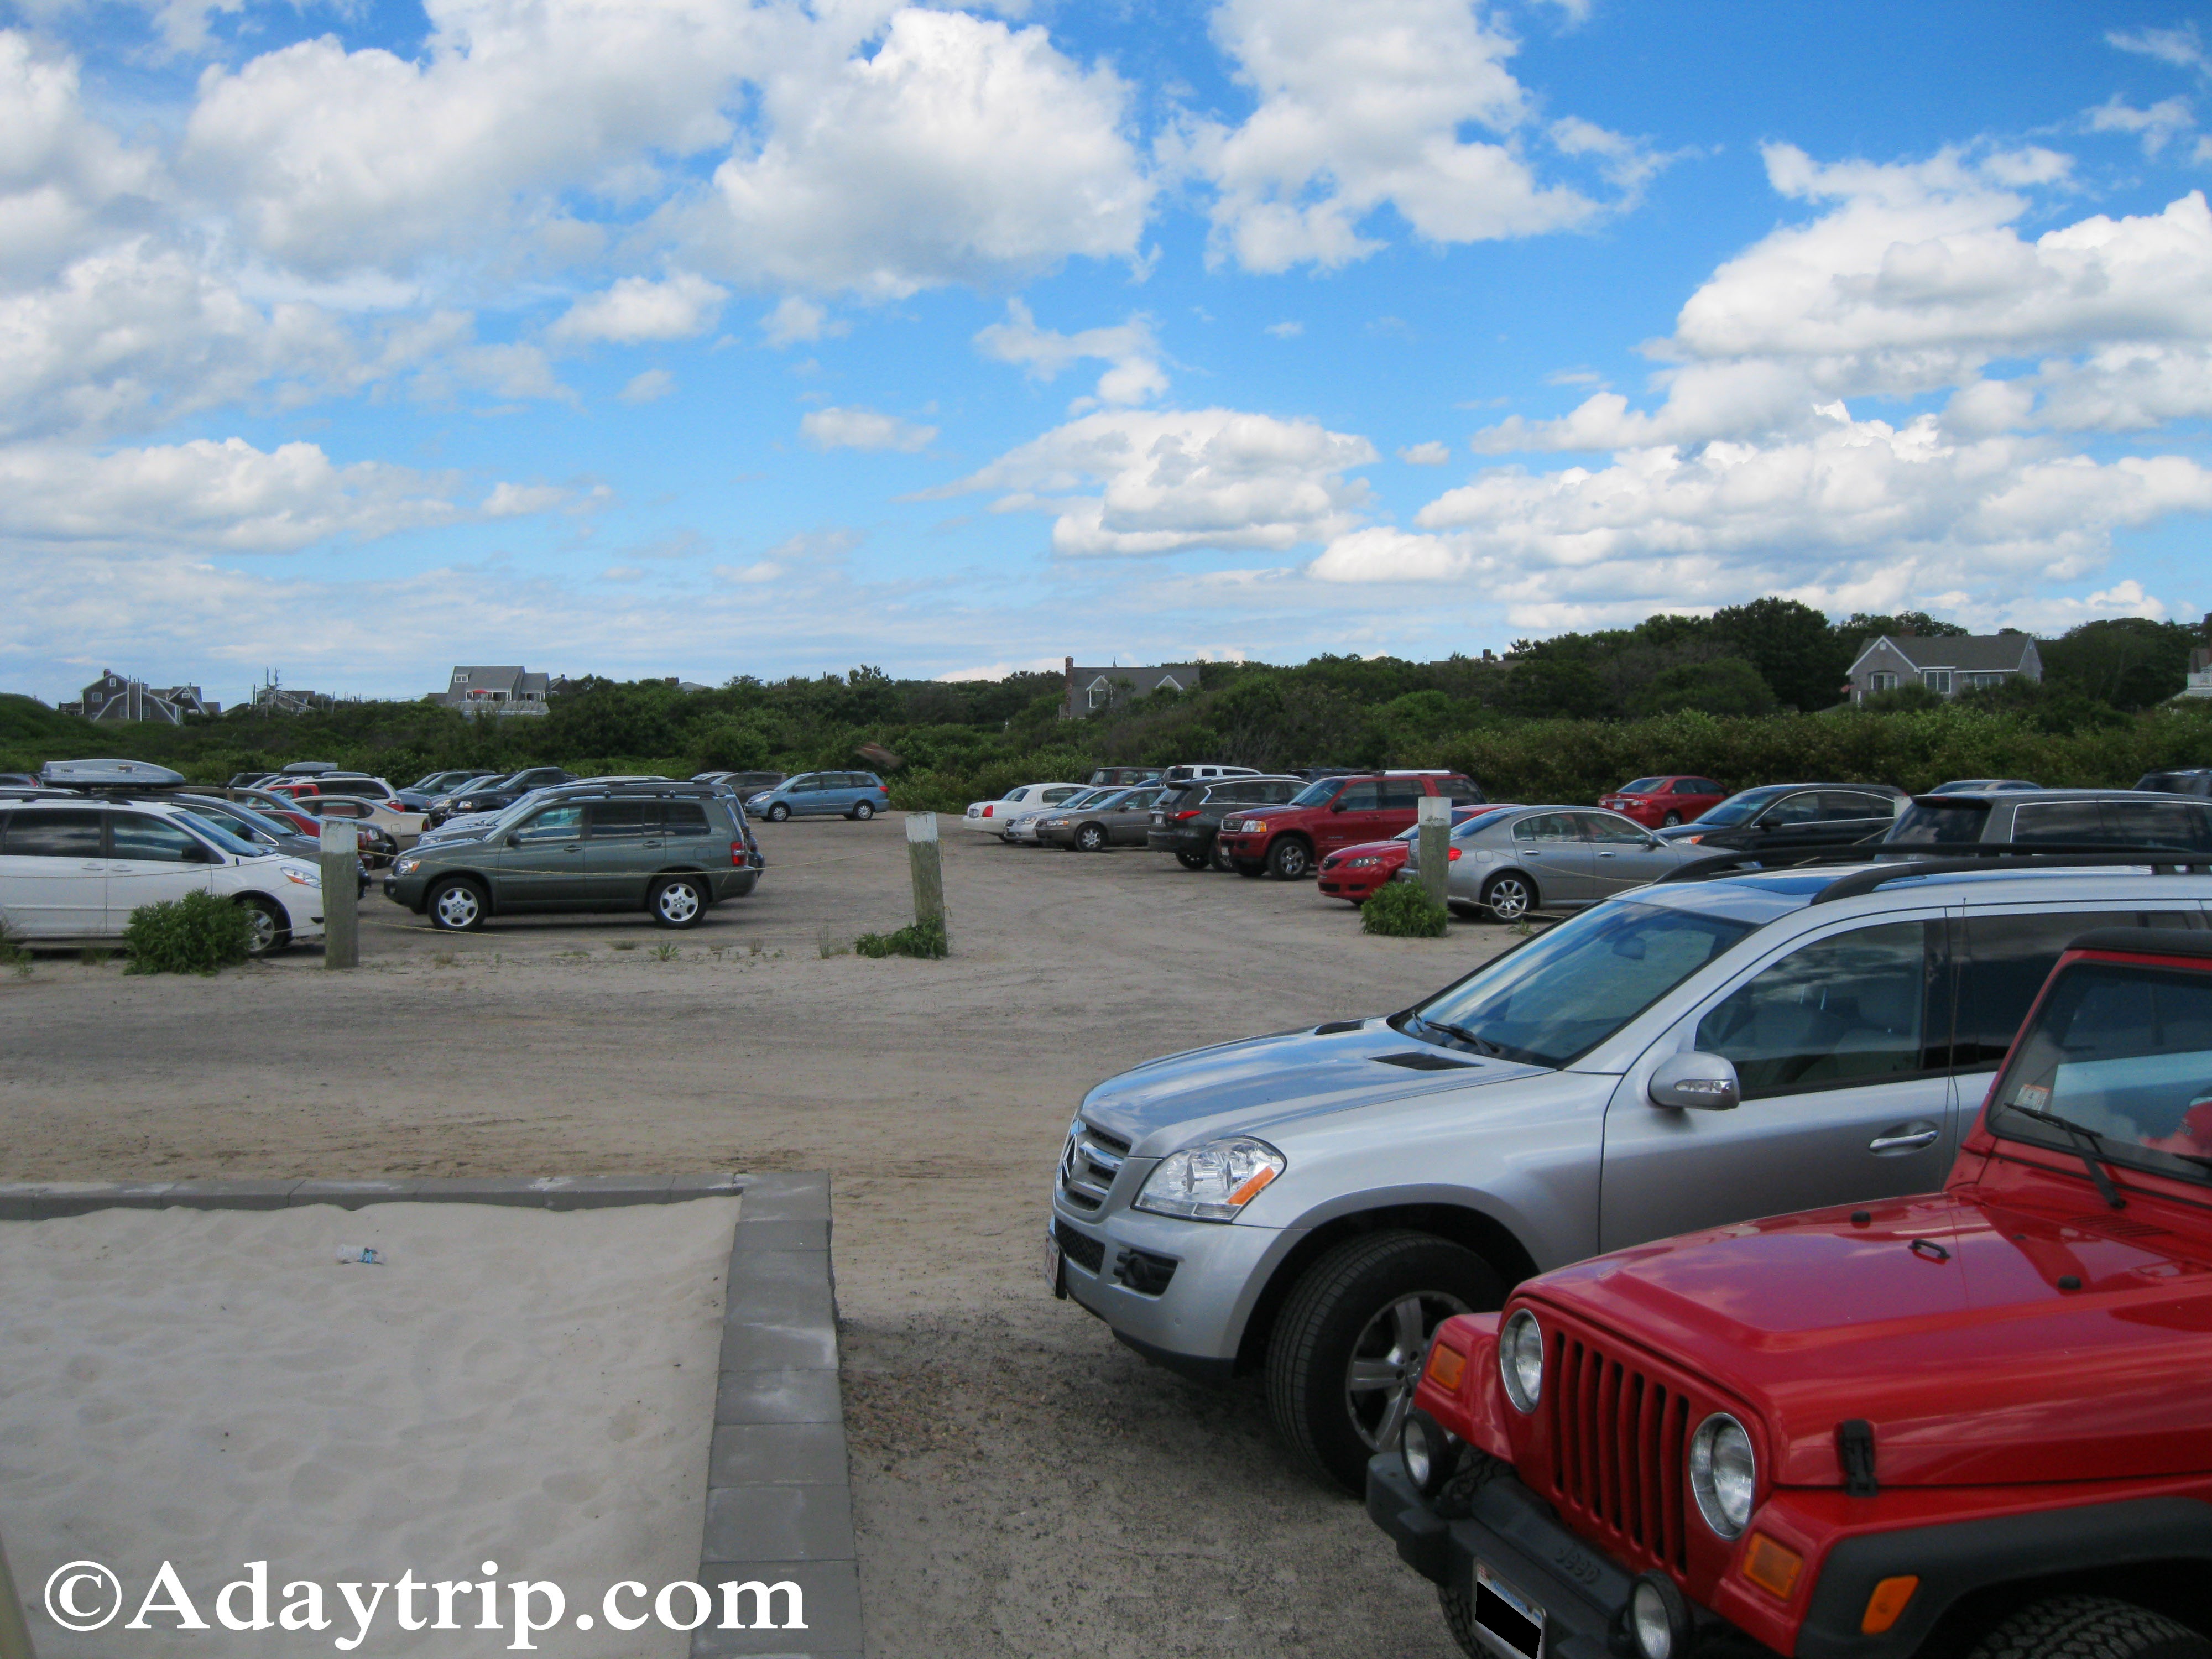 The Parking Lot at Mayflower Beach in Dennis MA